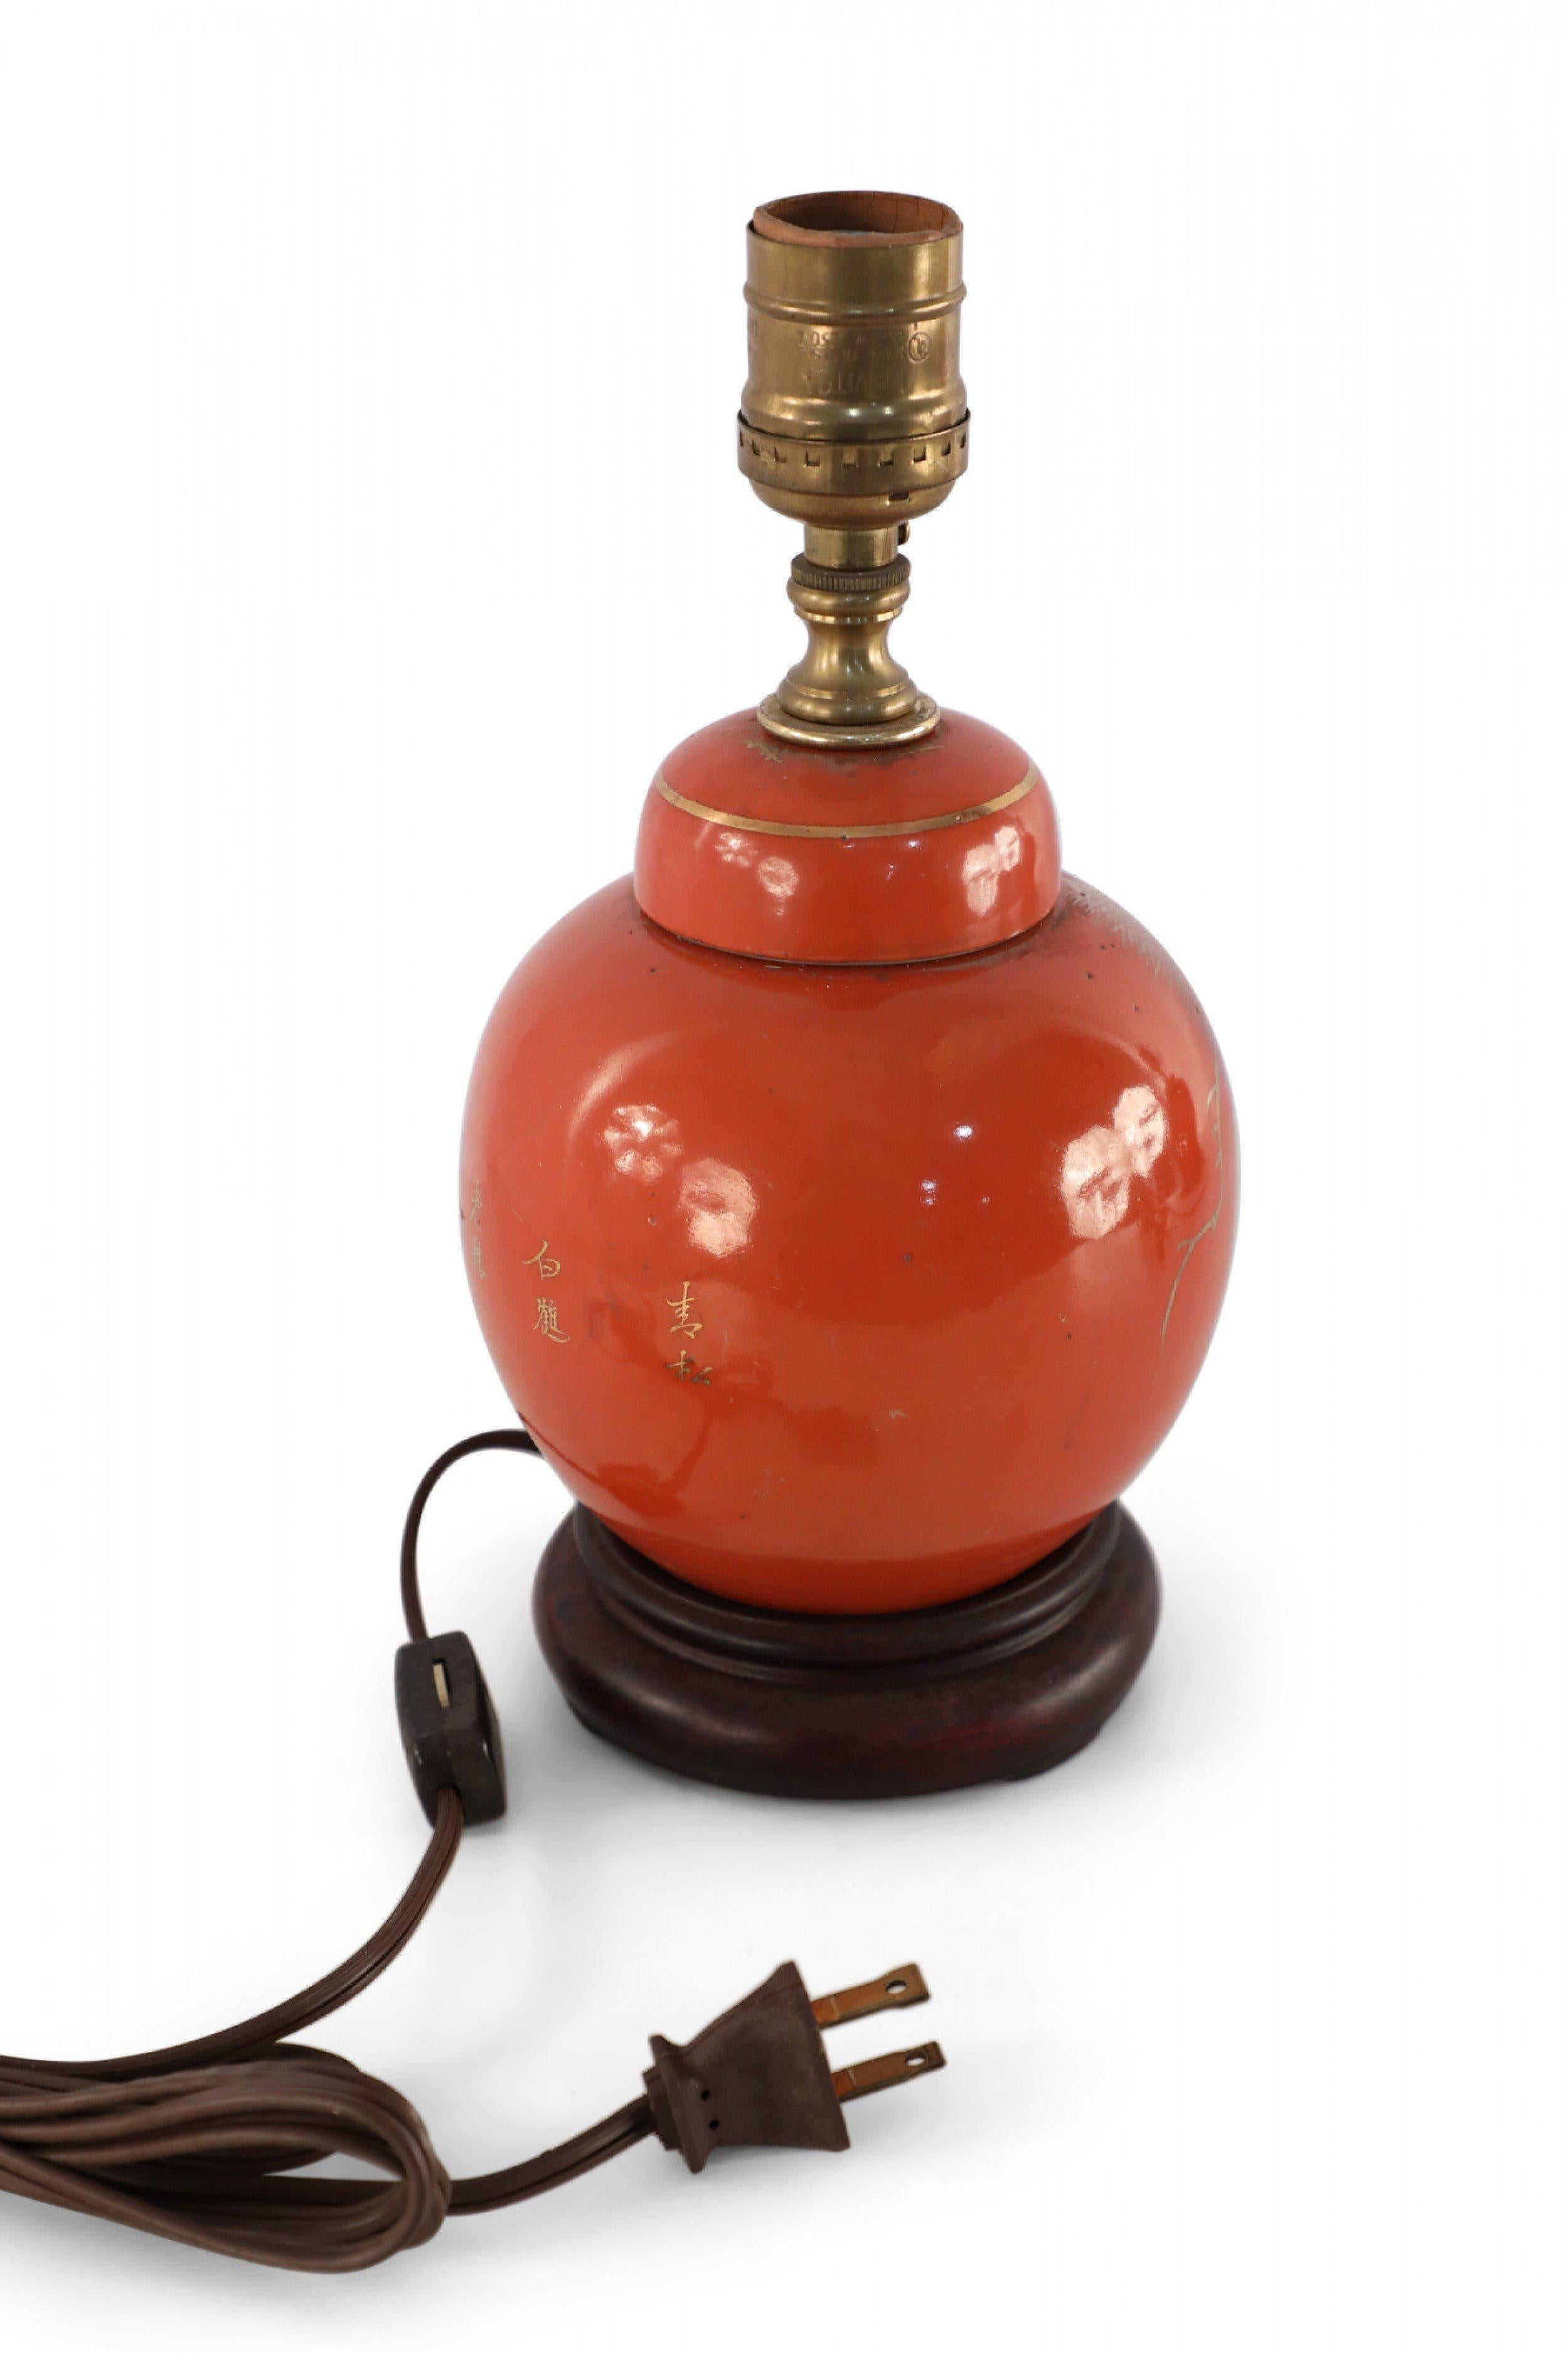 Antique Chinese (Early 20th Century) table lamp made from a round, orange, luster porcelain, lidded vase decorated with a gold crane design on one side and characters on the reverse, mounted on a wooden base and fitted with patinated brass